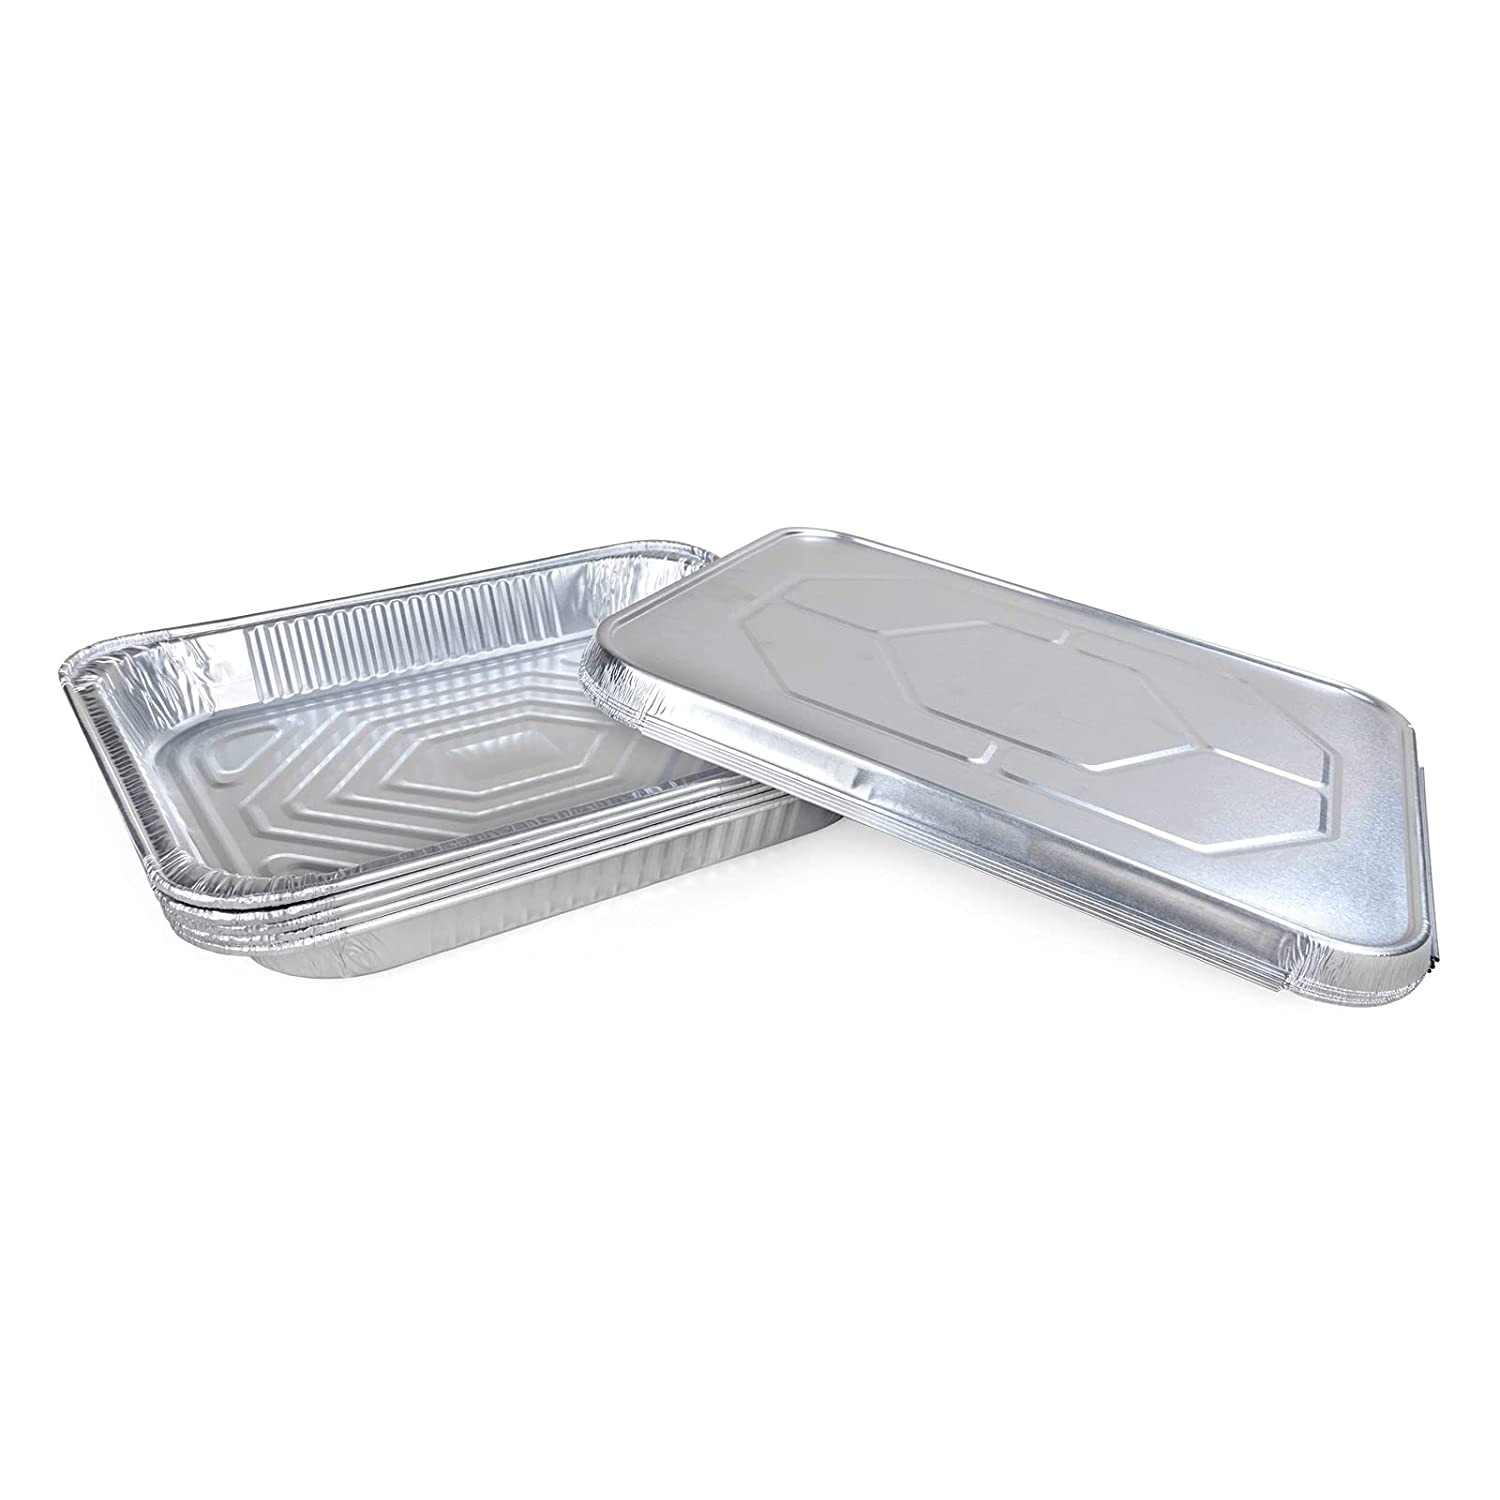 https://idlpack.com/image/cache/catalog/Products/Foil%20Pans%20and%20Trays/1half%20sized-1500x1500.jpg